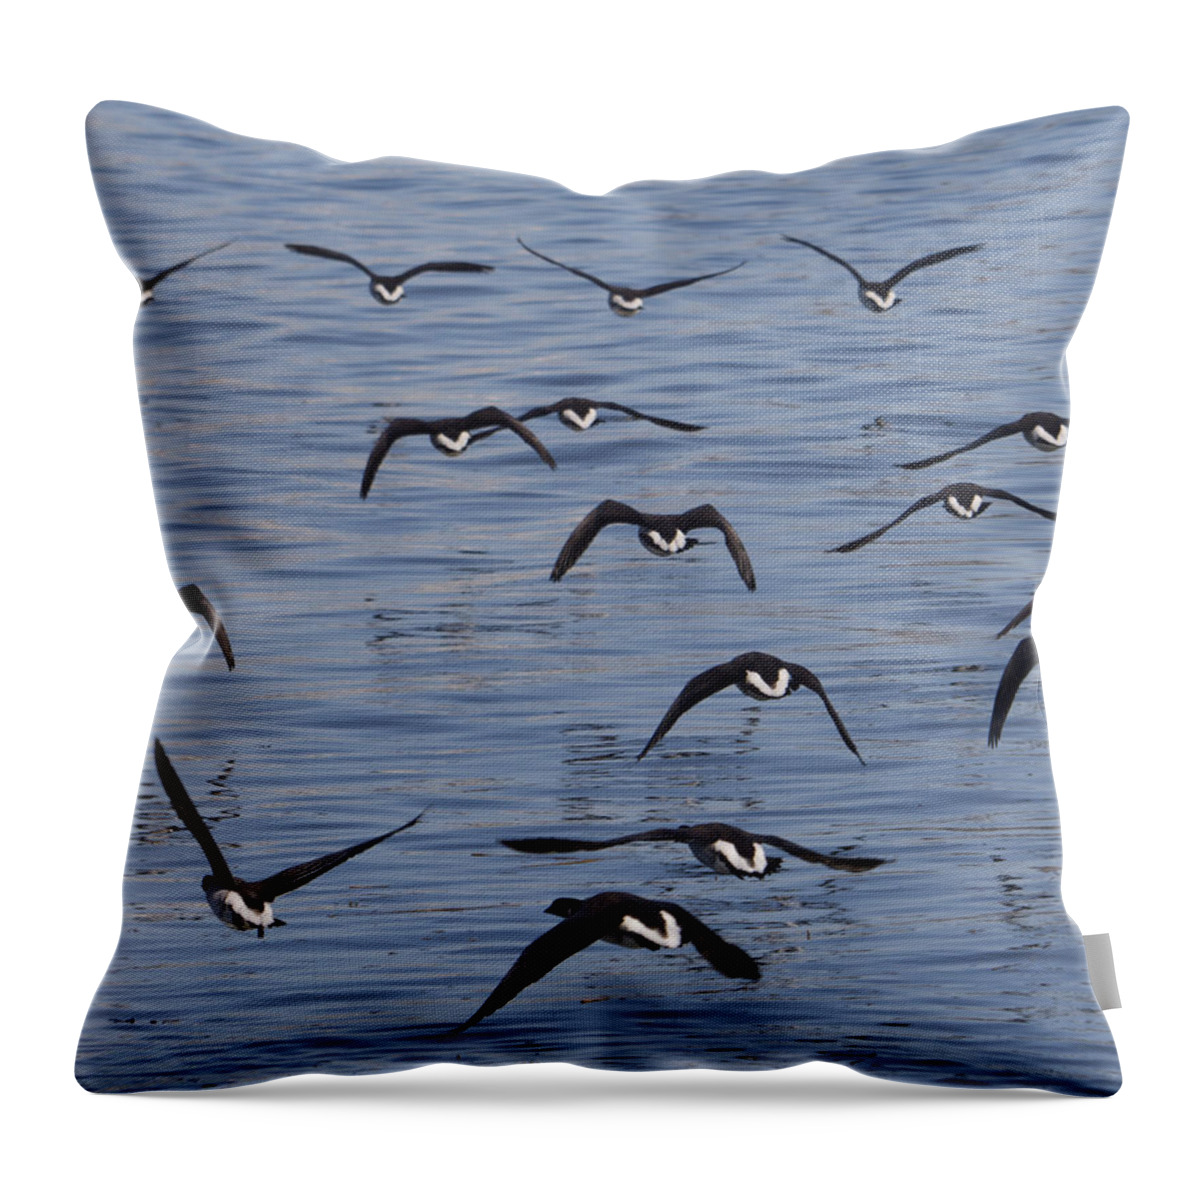 Birds Throw Pillow featuring the photograph In Flight by Paul C Ross